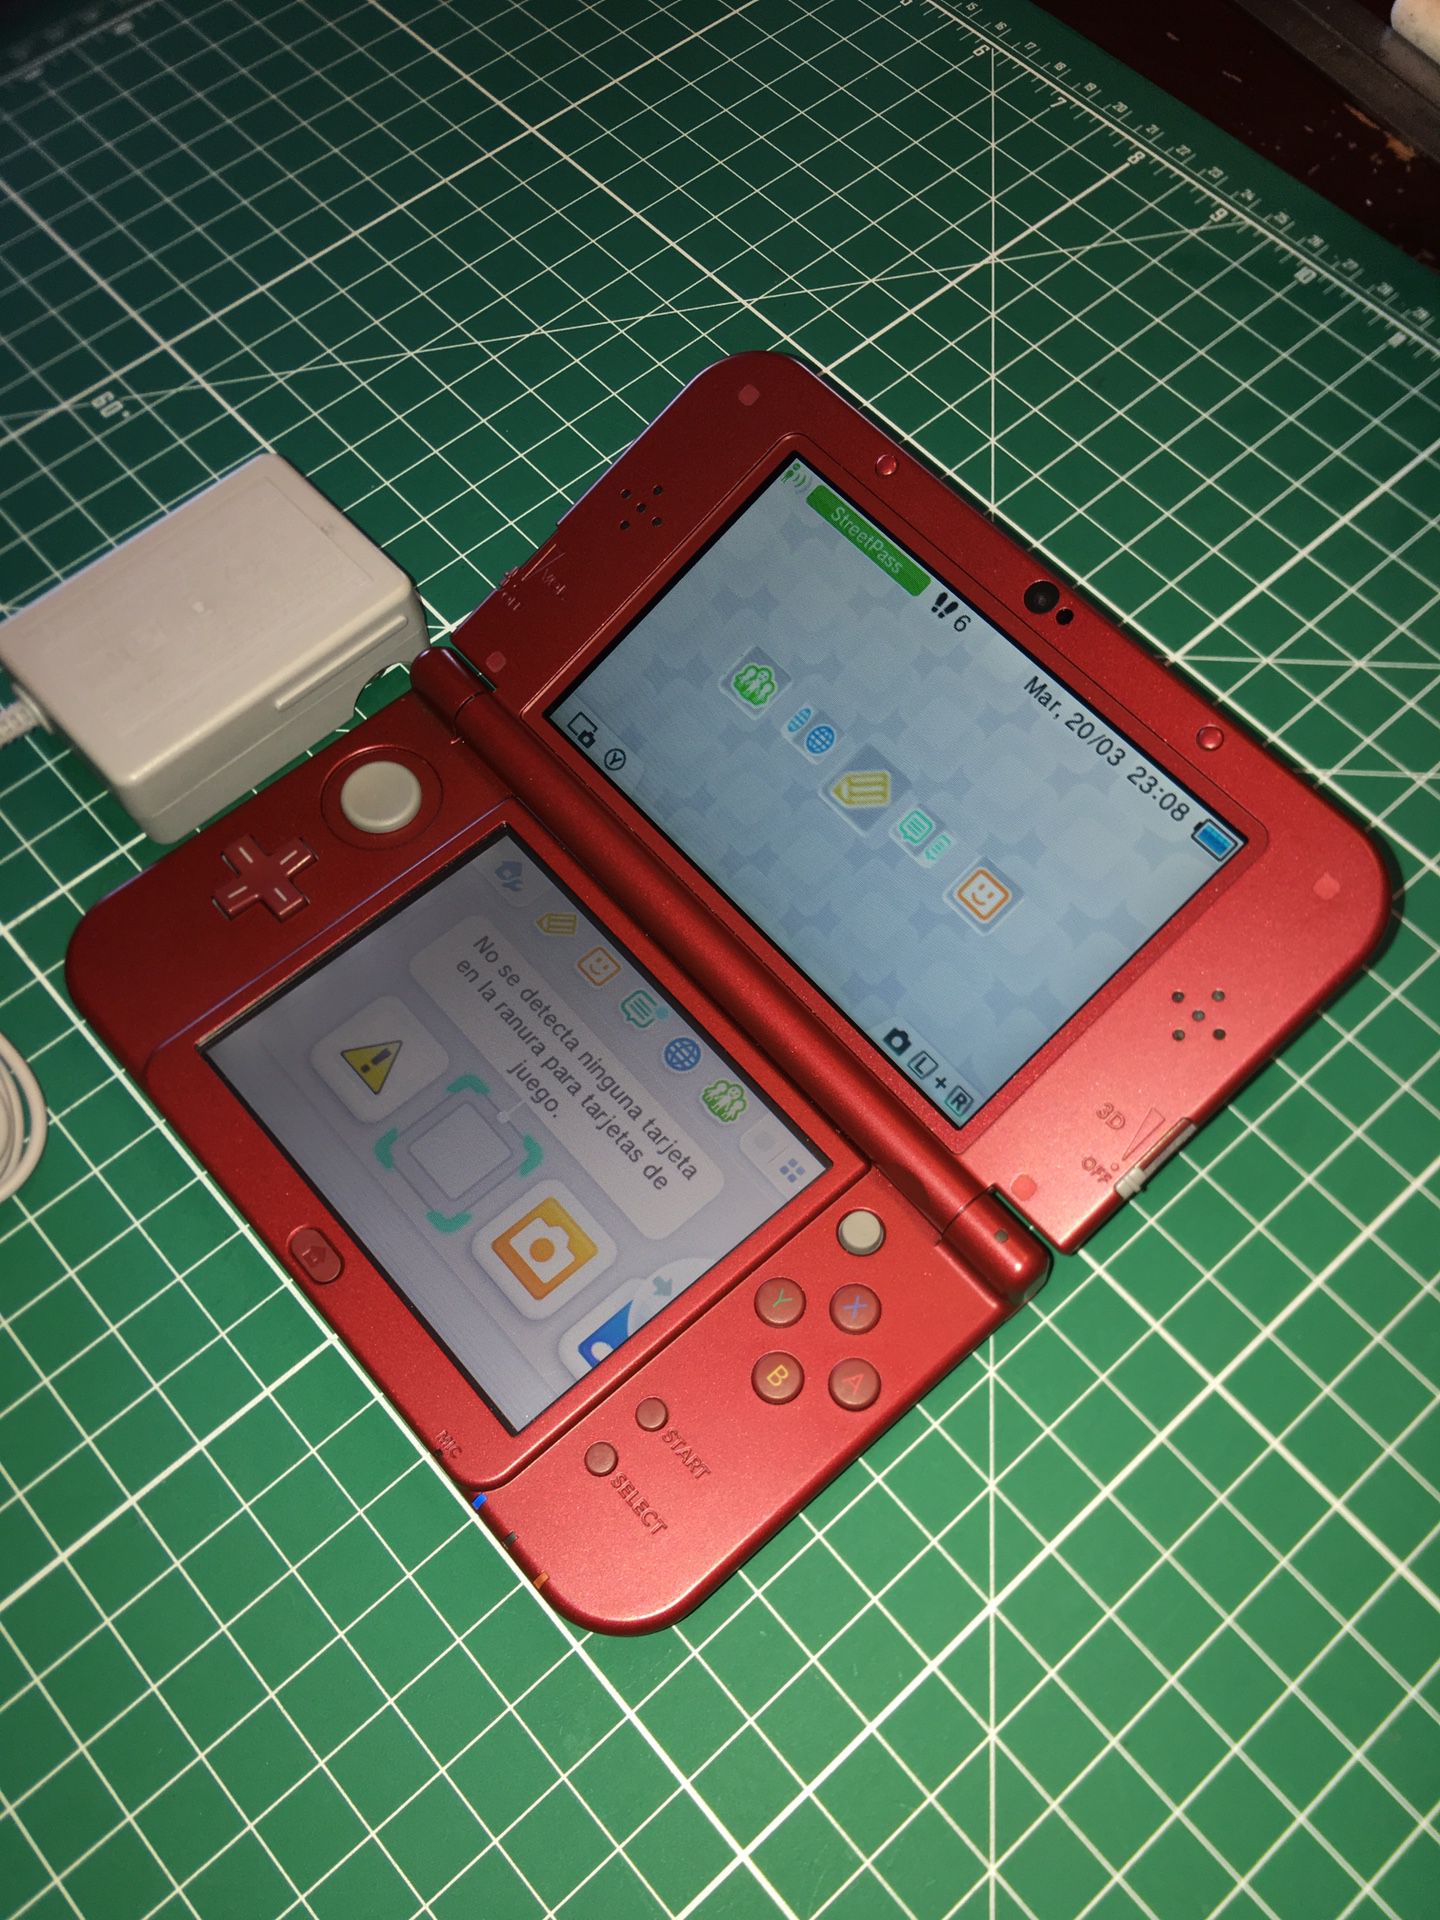 Nintendo 3ds xl plus games and charger. (Pickup only)